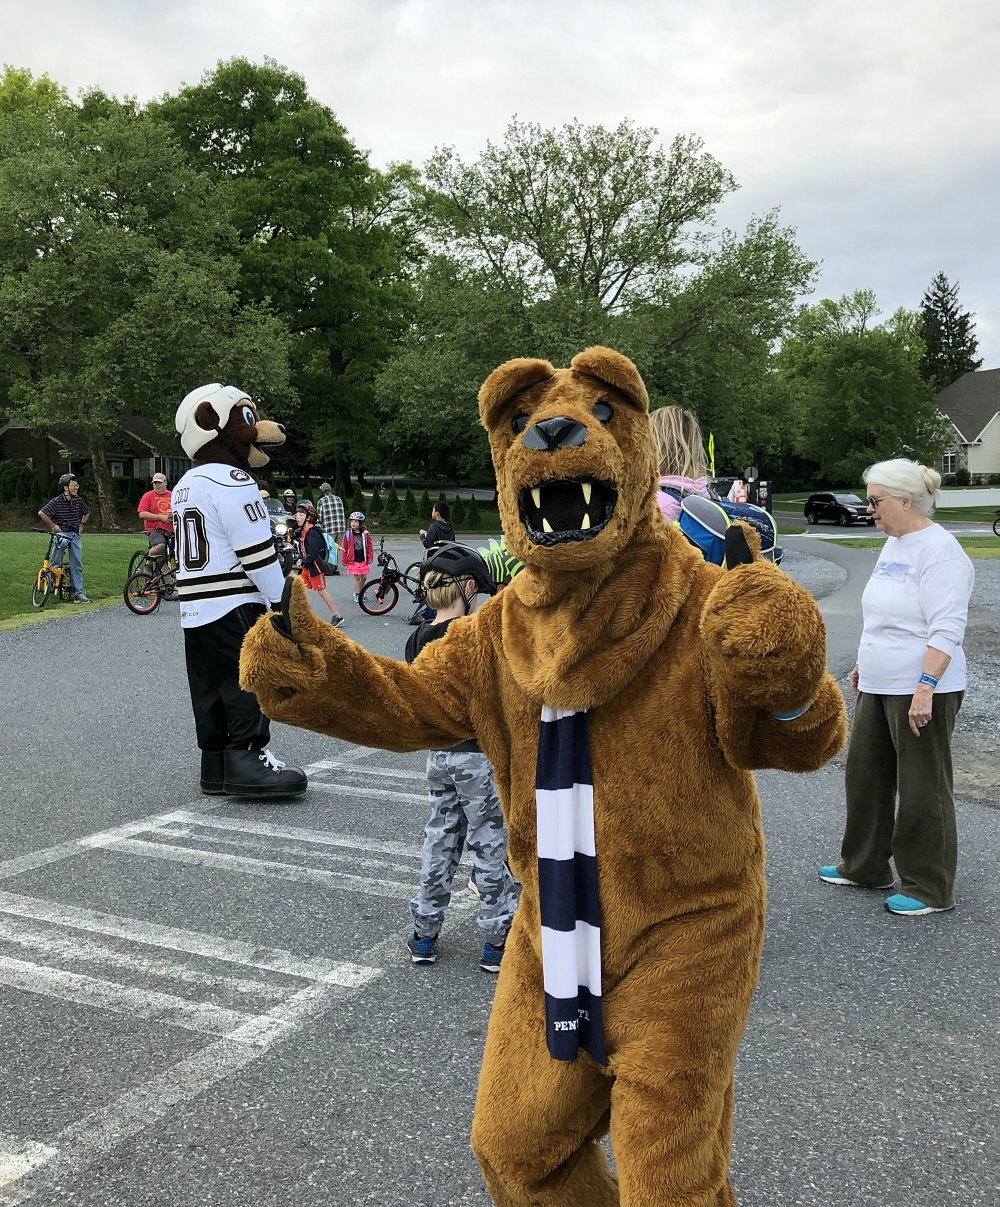 Someone in a costume dressed as the Penn State Nittany Lion gives a thumbs up sign. Behind him people on bicycles gather in a parking lot. A man dressed as the Hershey Bear’s mascot, Cocoa, stands among them.